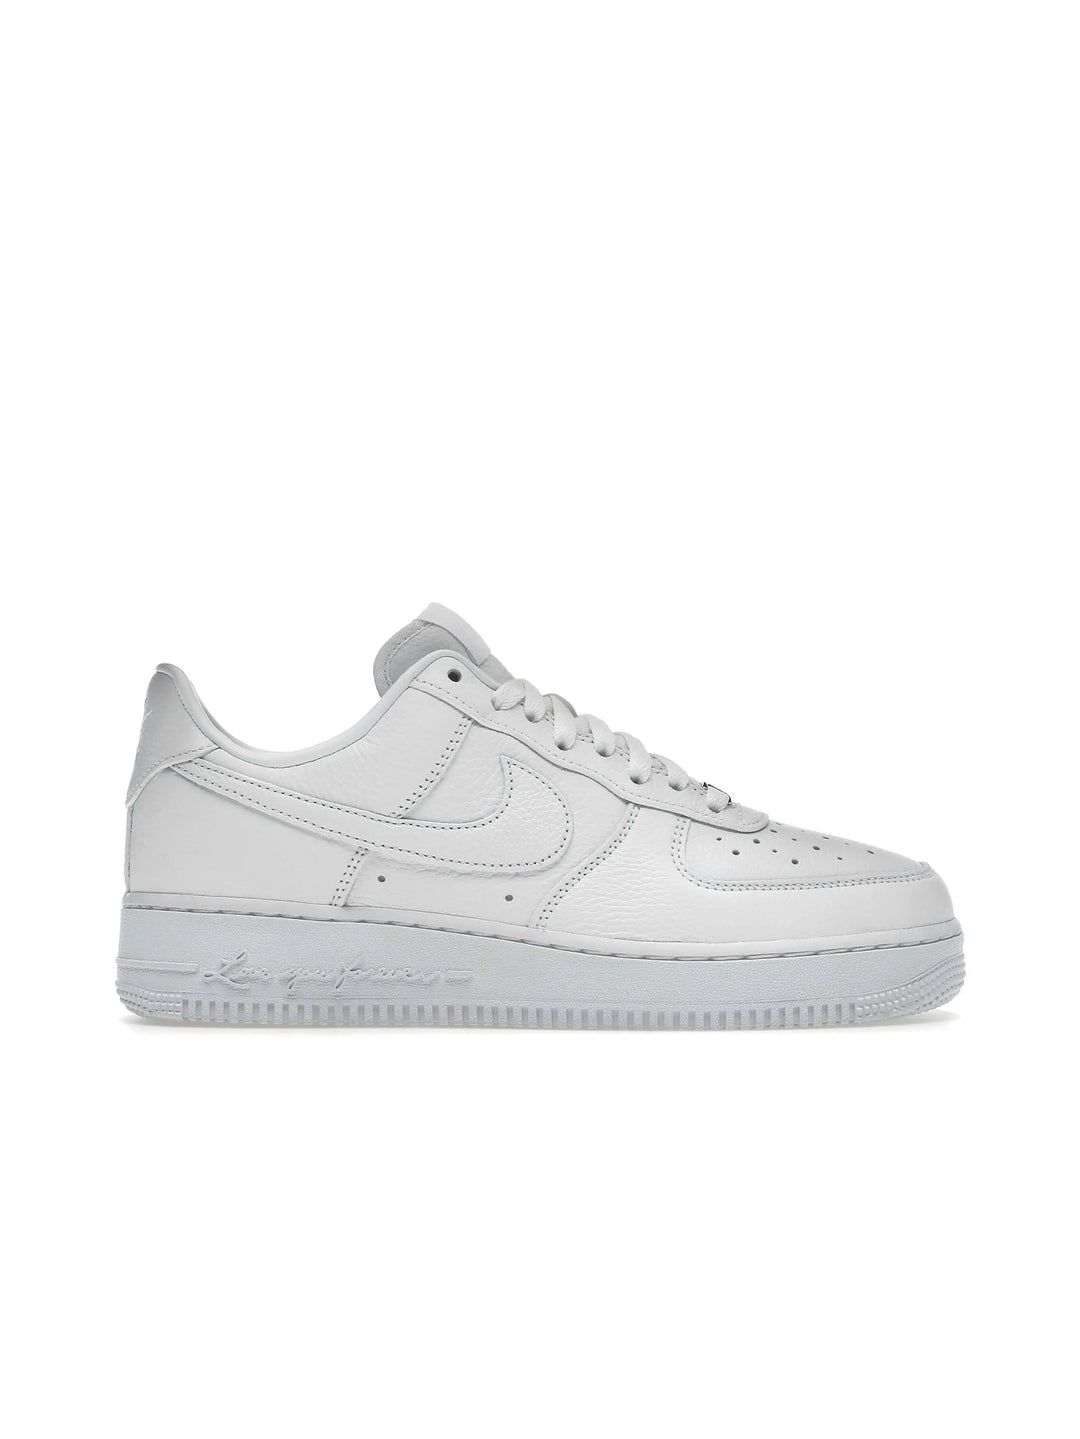 Nike Air Force 1 Low Drake NOCTA Certified Lover Boy in Auckland, New Zealand - Shop name